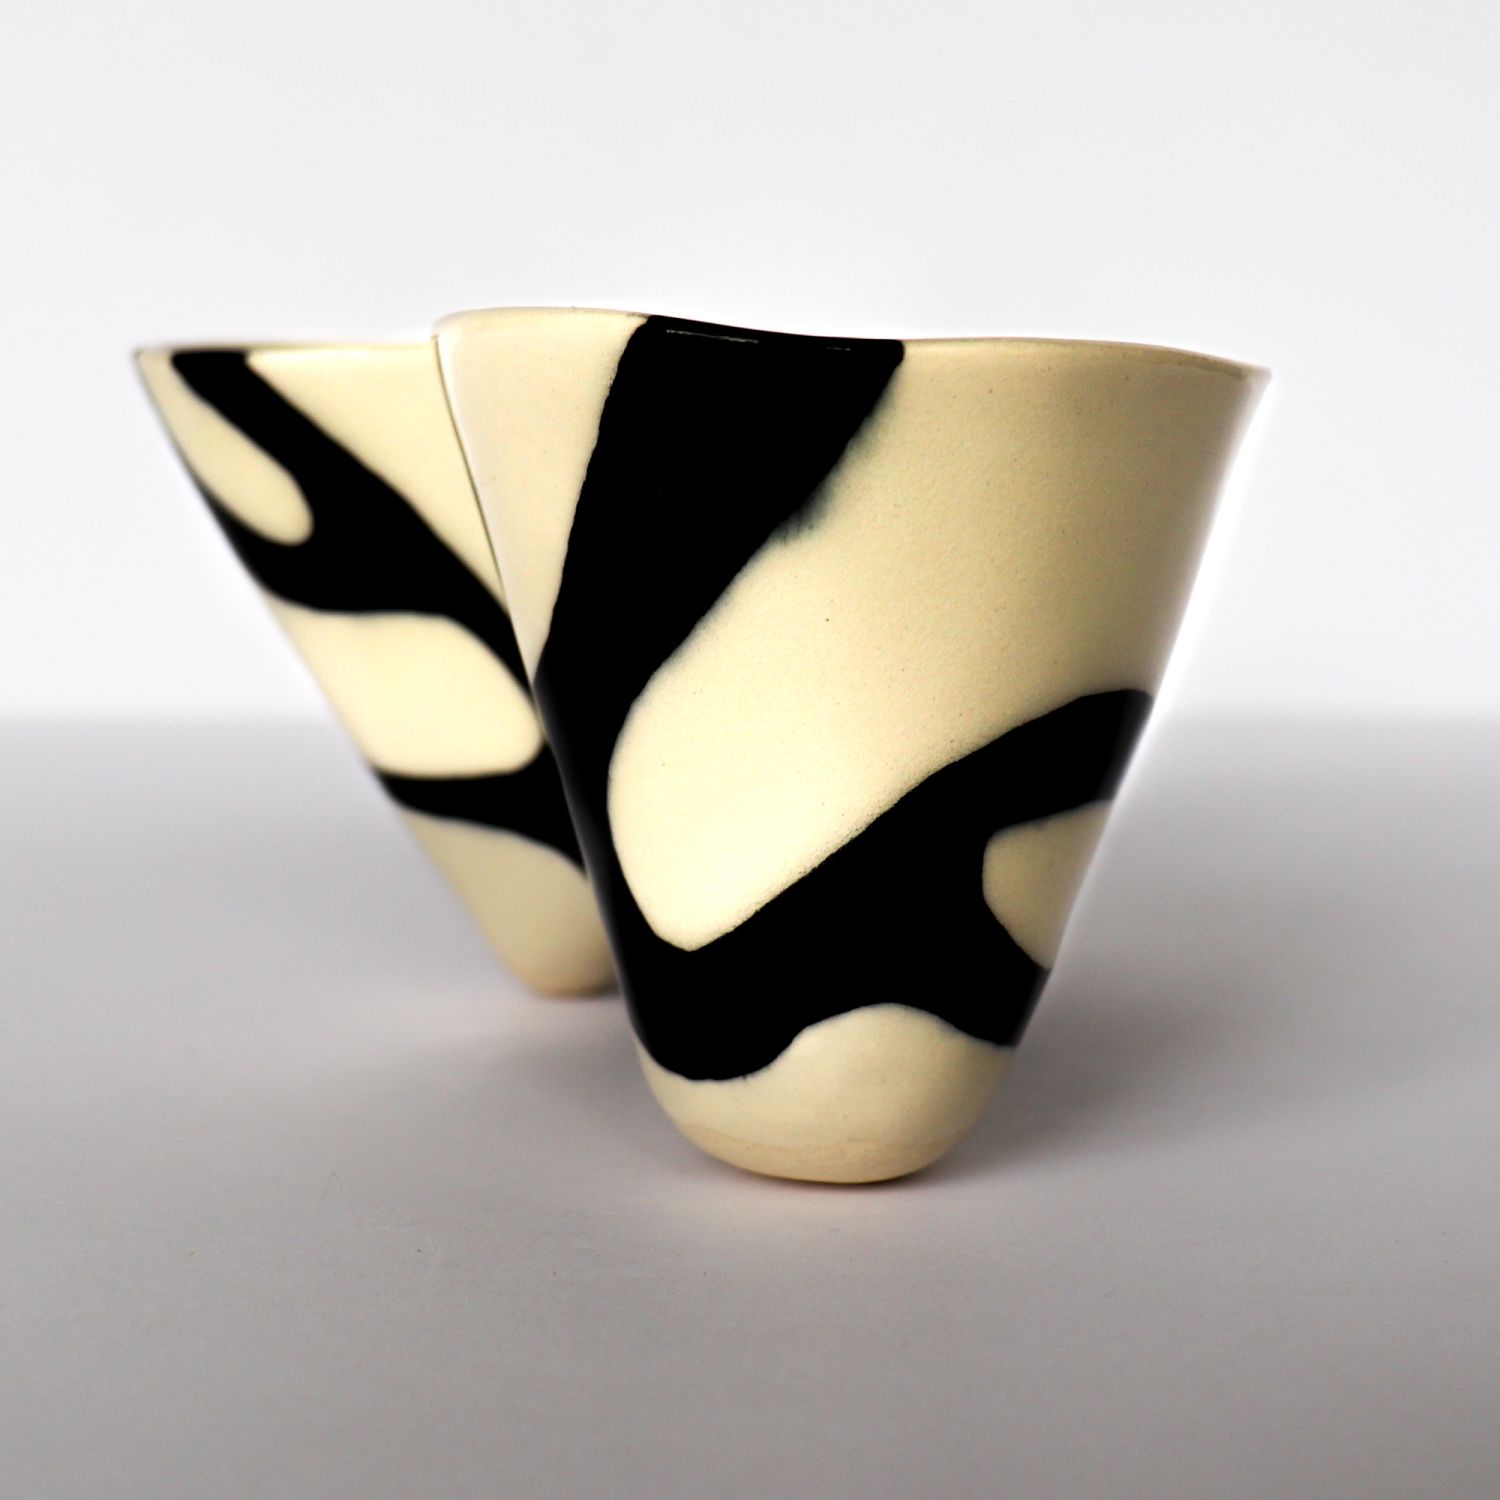 Alana Marcoccia: Interconnected Sculptural Bowl Product Image 11 of 12